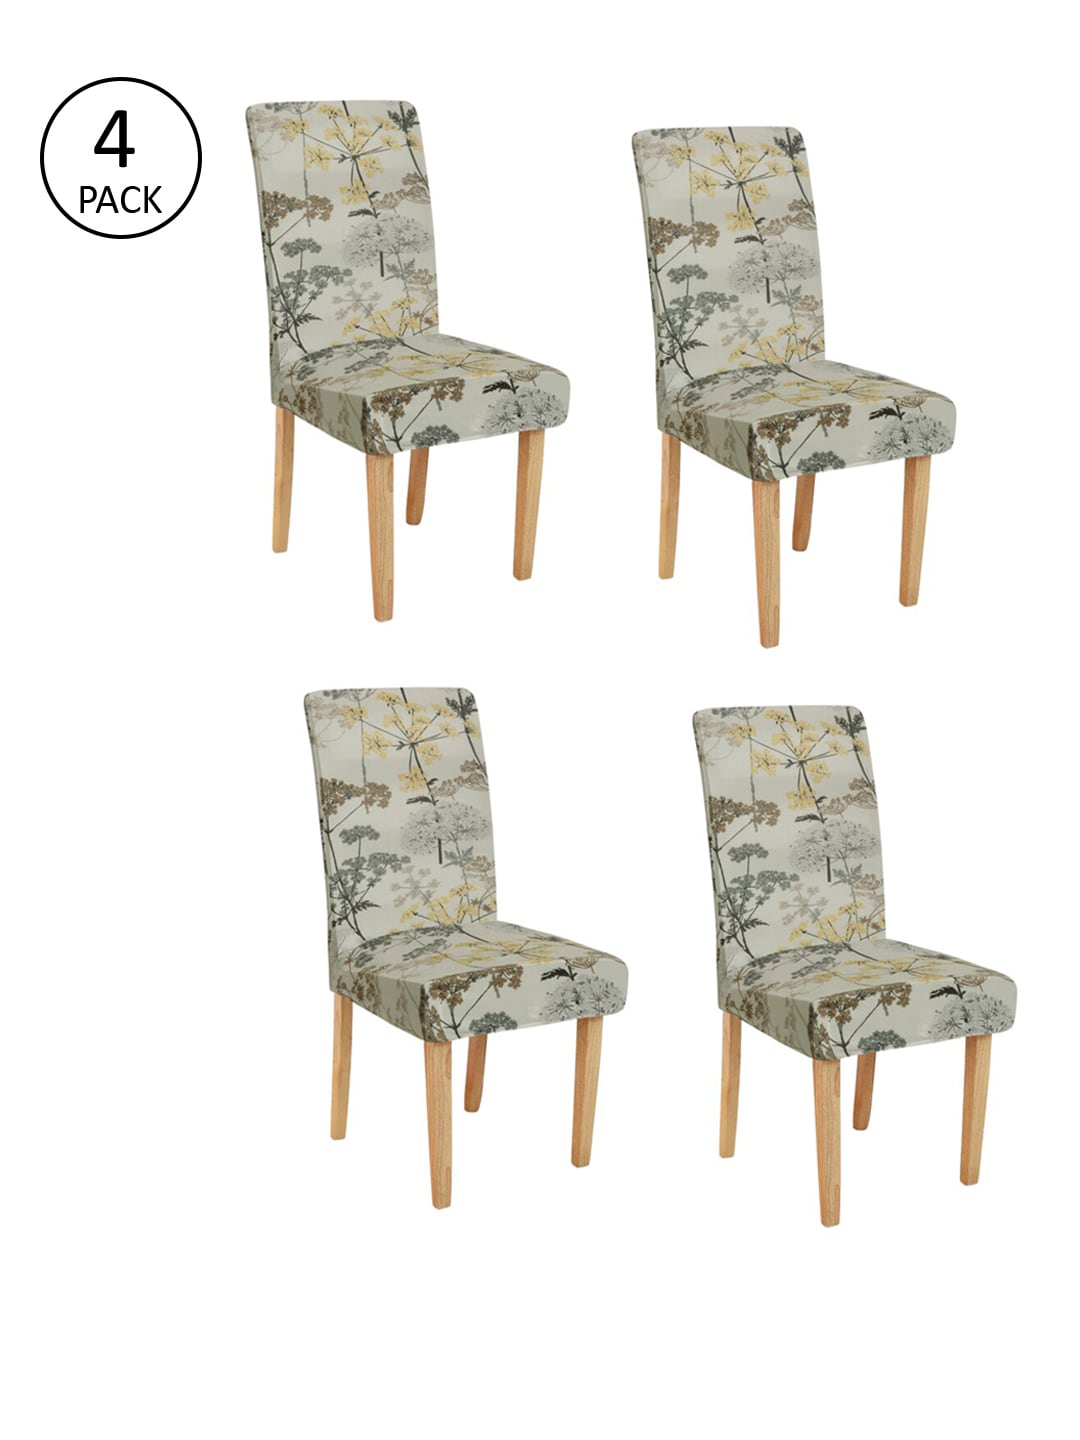 Rajasthan Decor Set Of 4 Beige & Grey Floral Printed Chair Covers Price in India